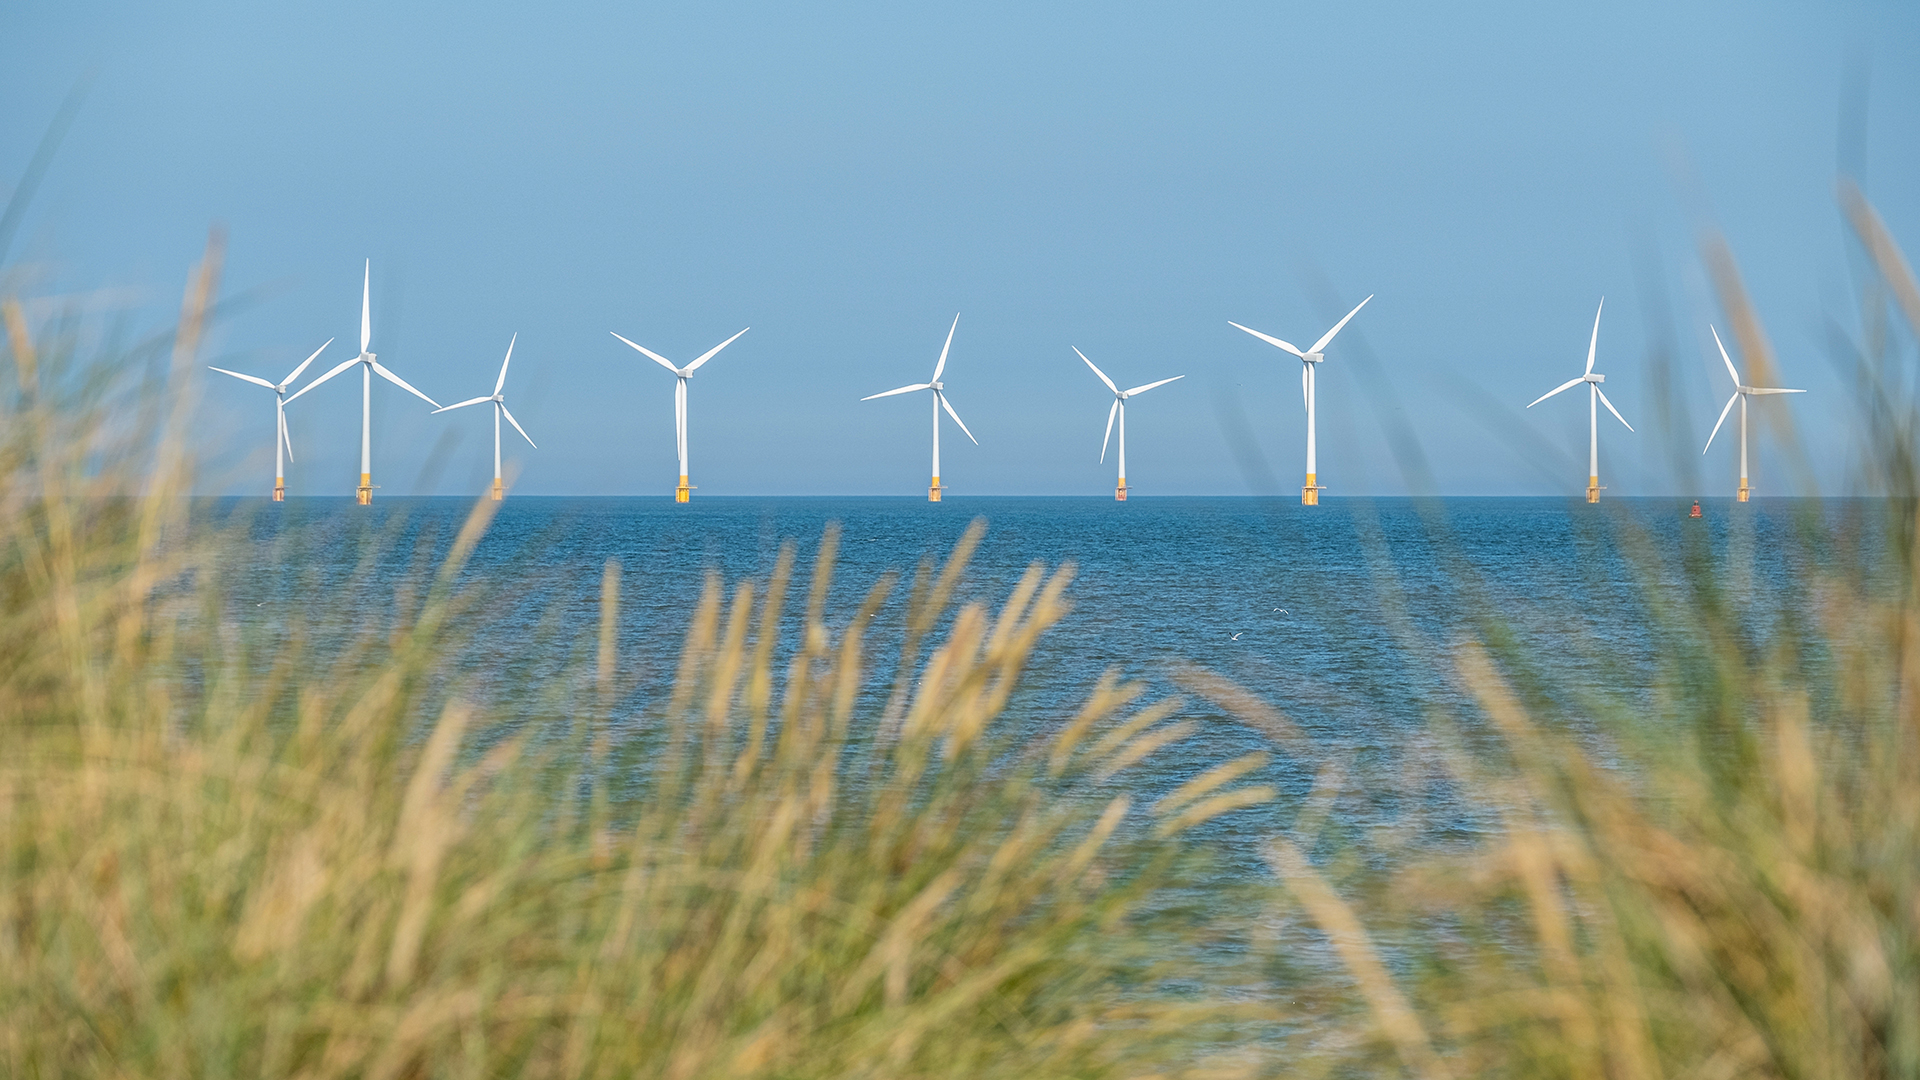 Scroby Sands Wind Farm located in the North Sea off Norfolk coas